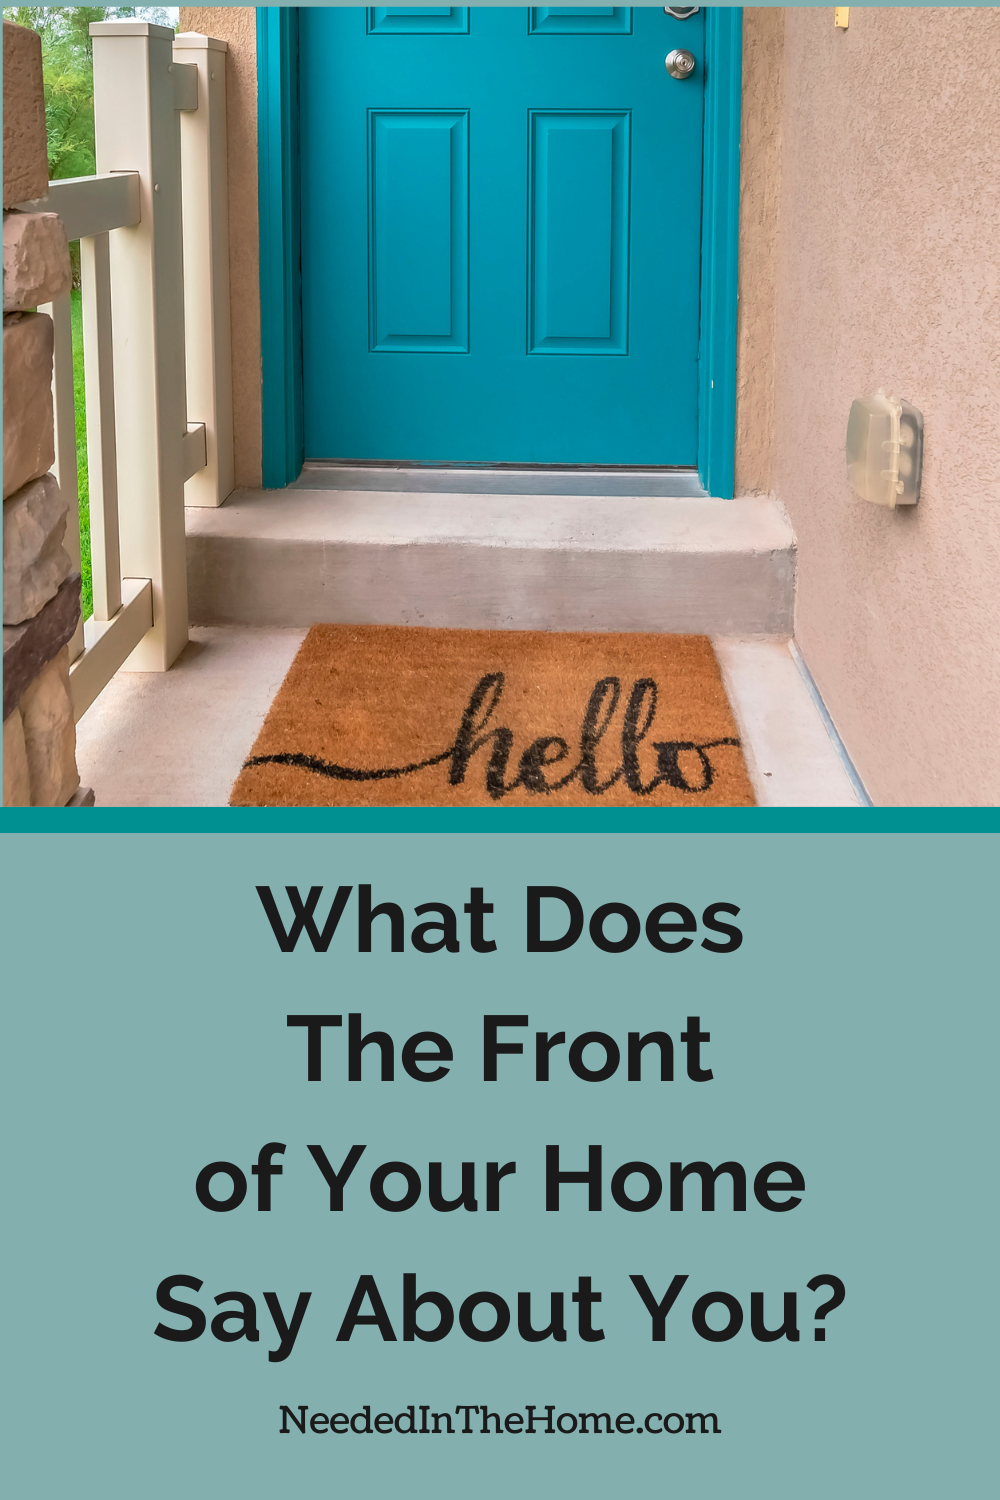 teal door front exterior hello welcome mat what does the front of your home say about you neededinthehome